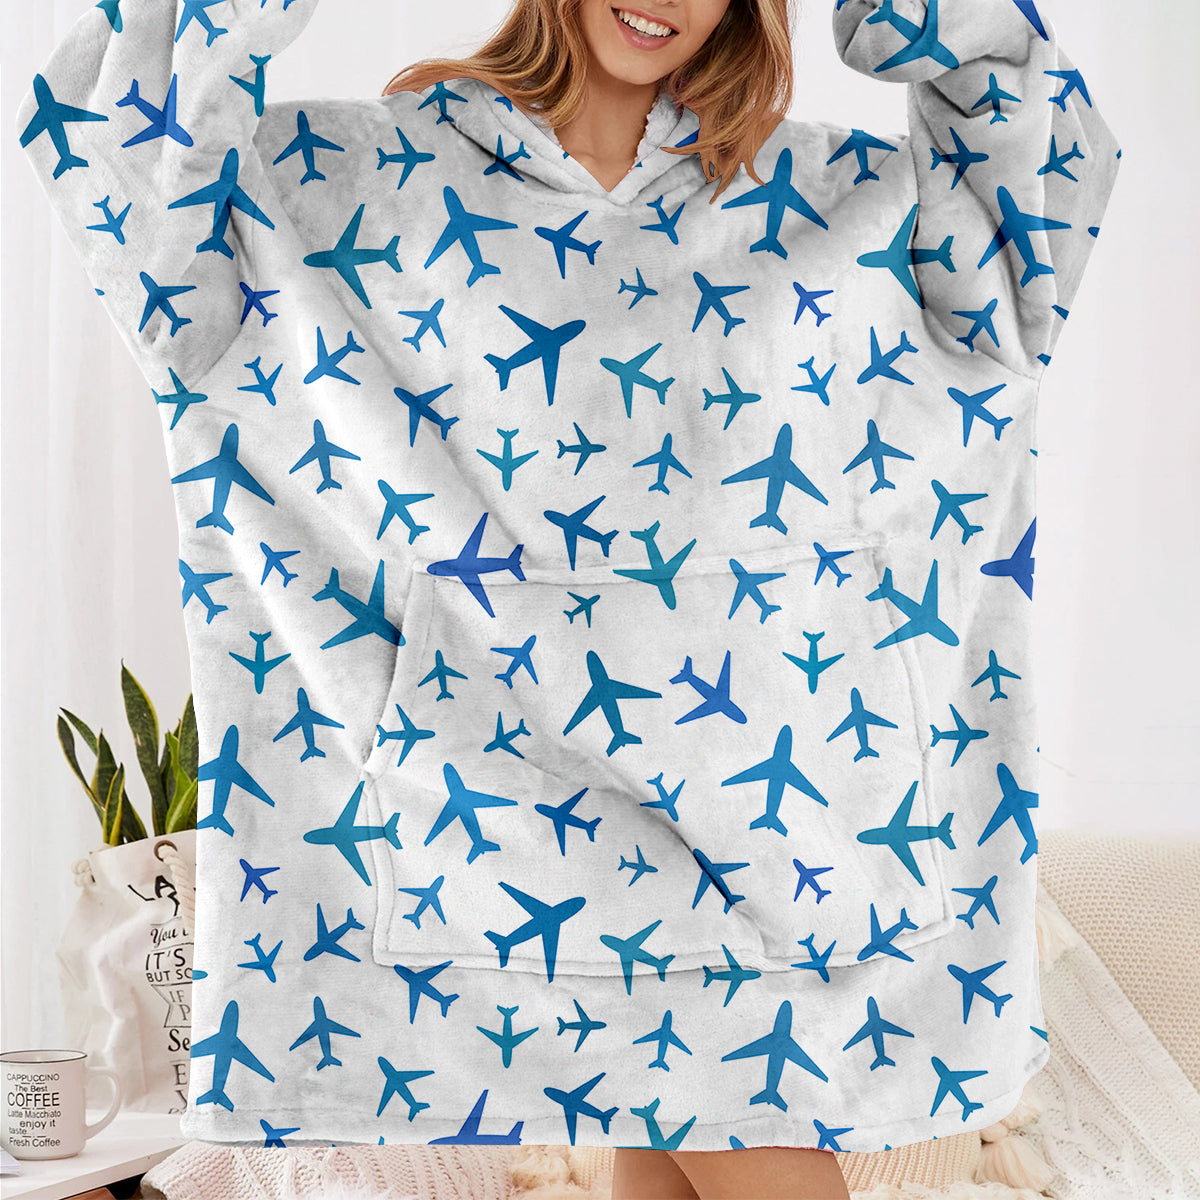 Many Airplanes White Designed Blanket Hoodies